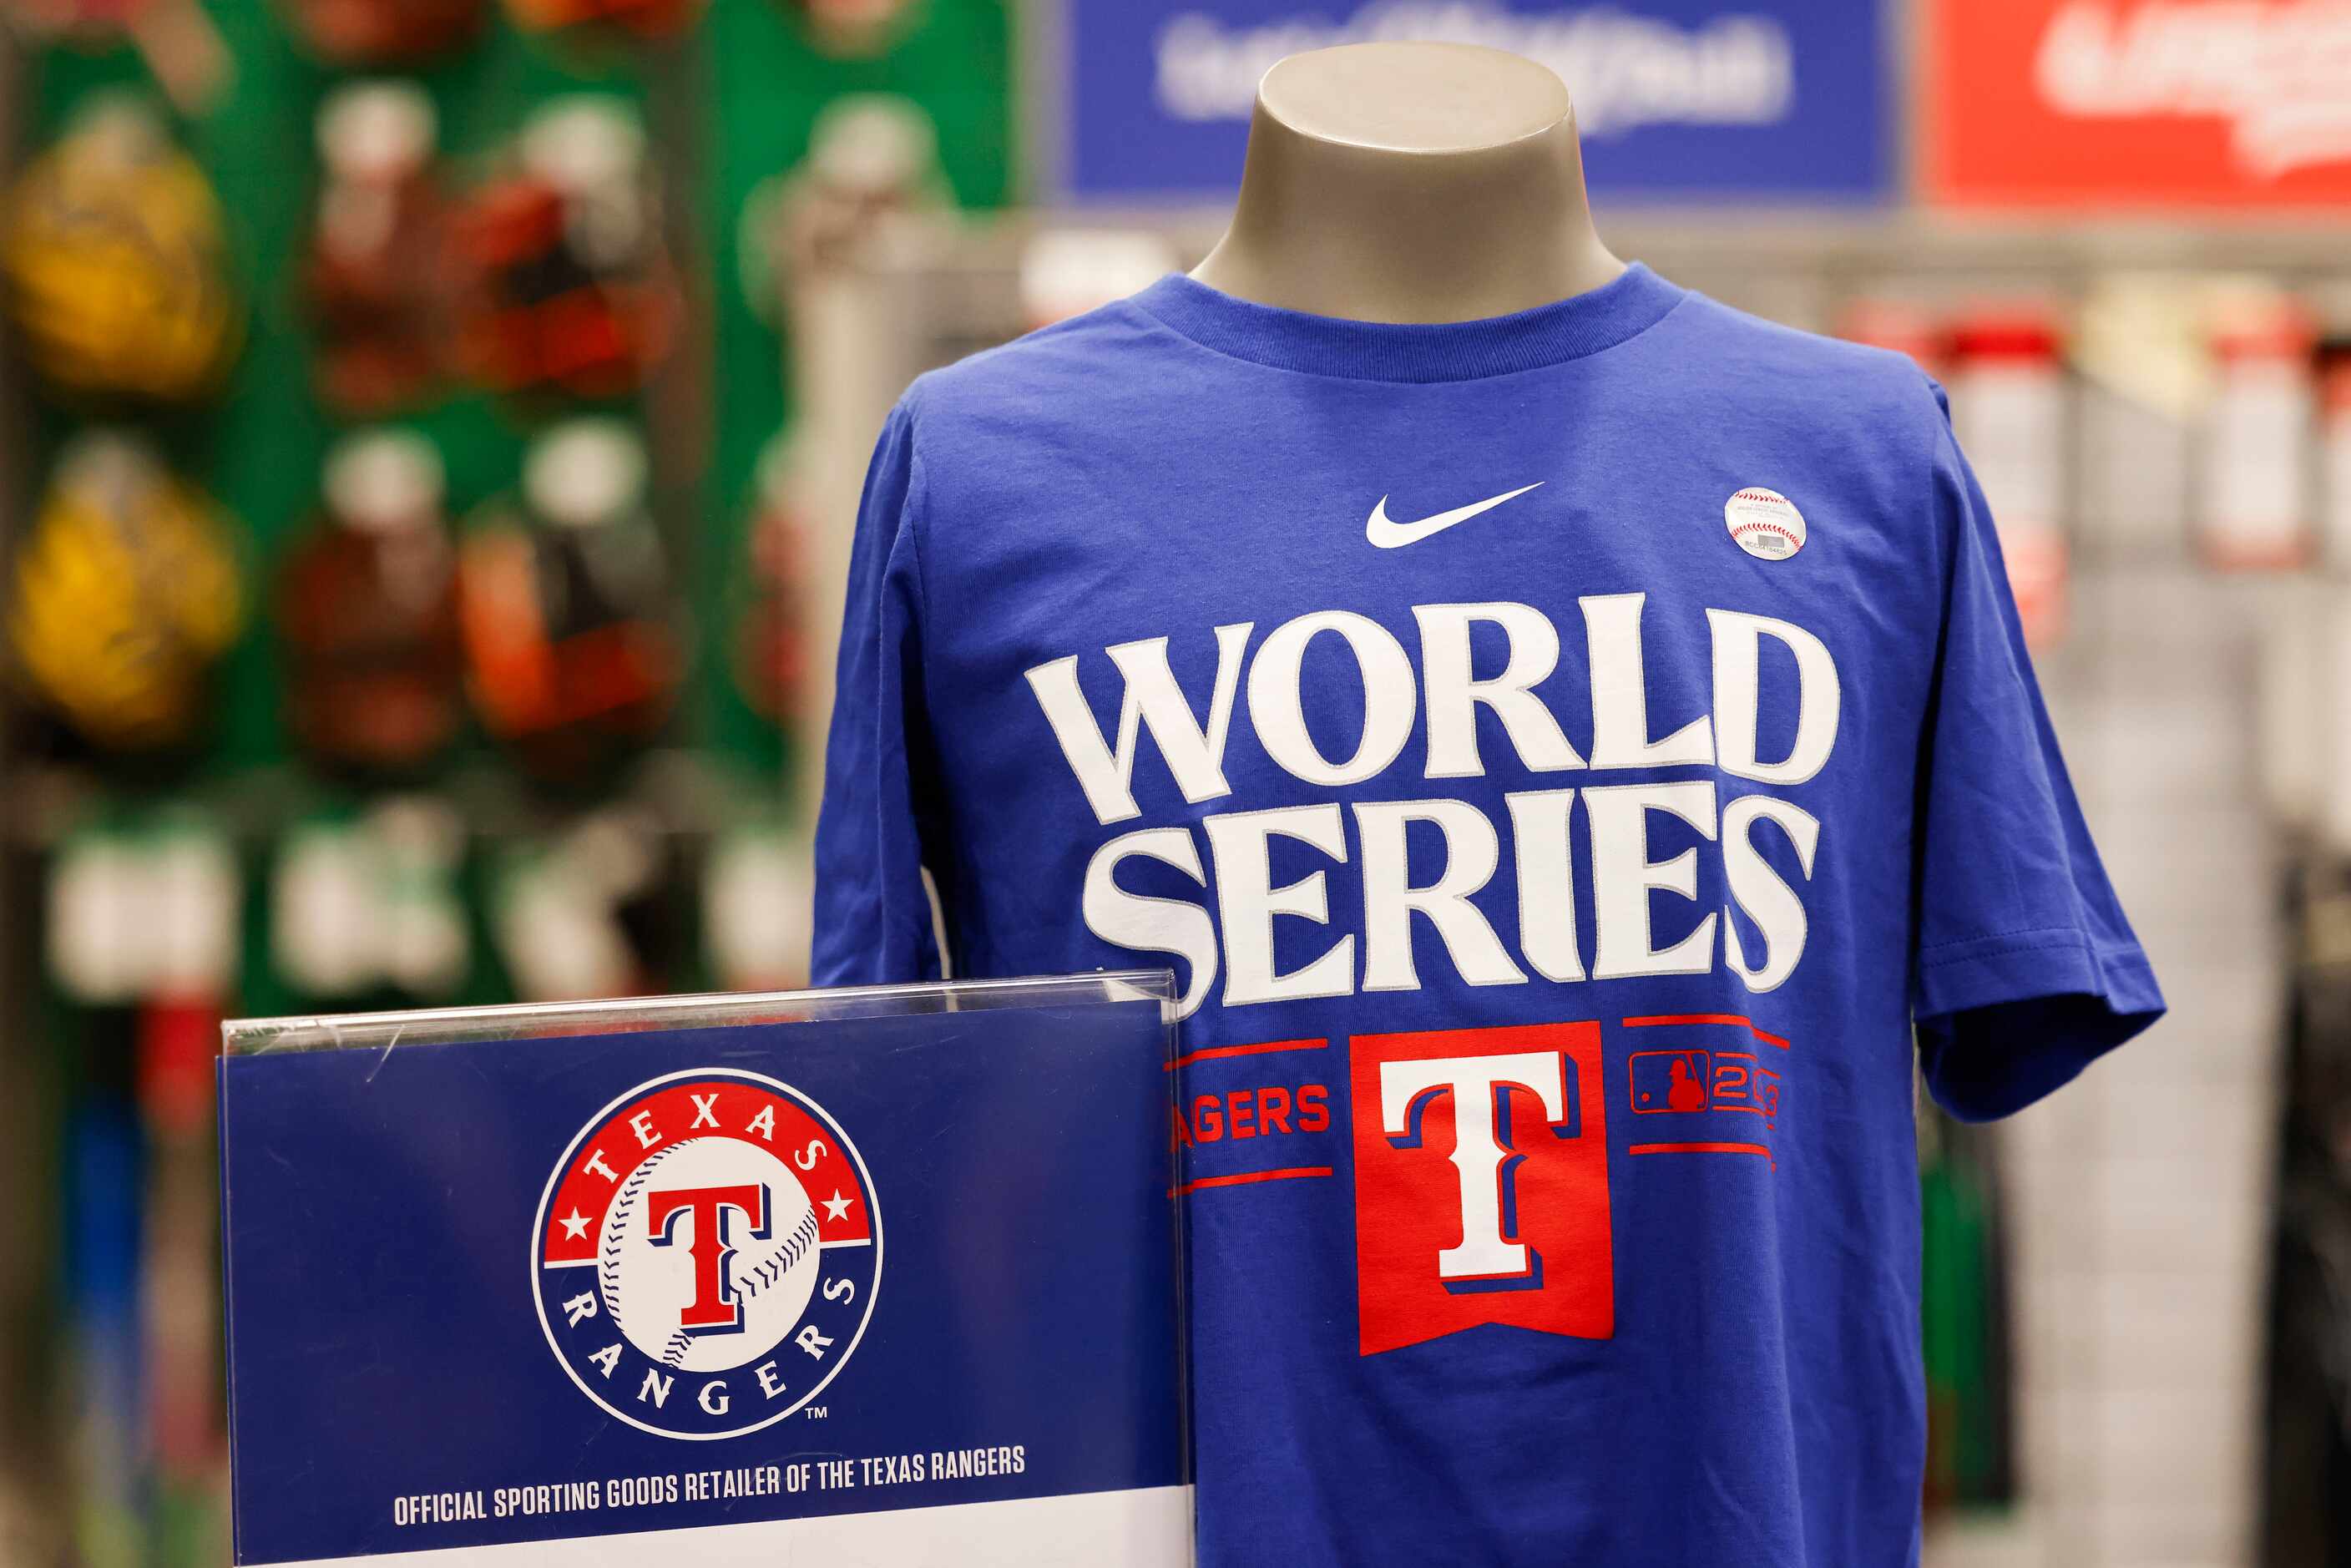 Texas Rangers World Series theme shirt at Academy Sports + Outdoors on, Tuesday, Oct. 24,...